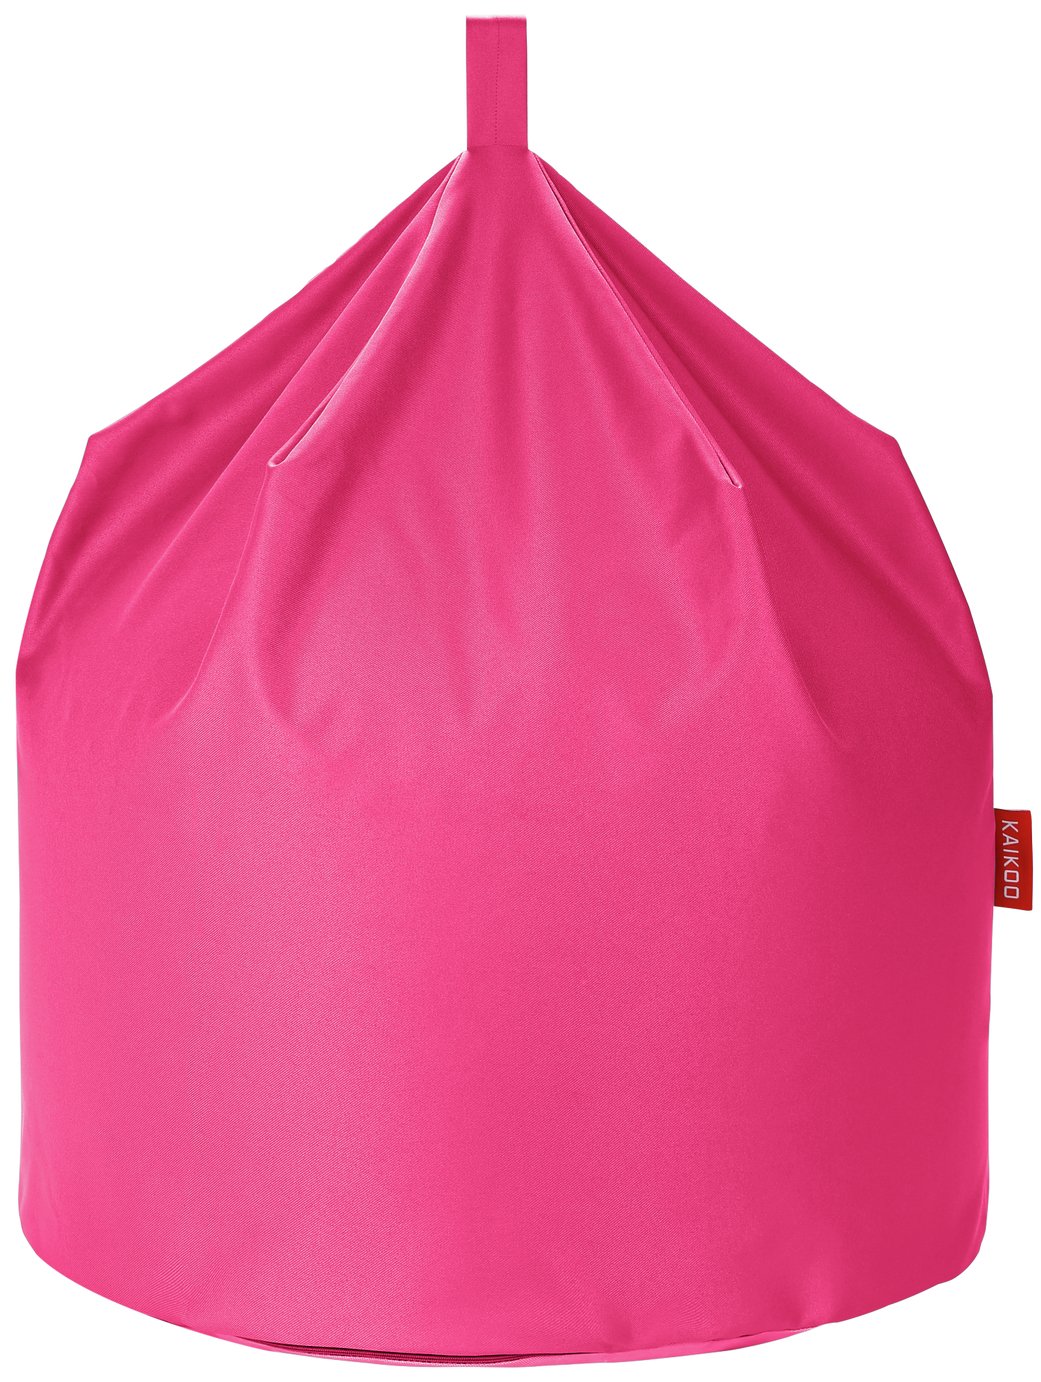 Argos Home Large Pink Classic Bean Bag Review